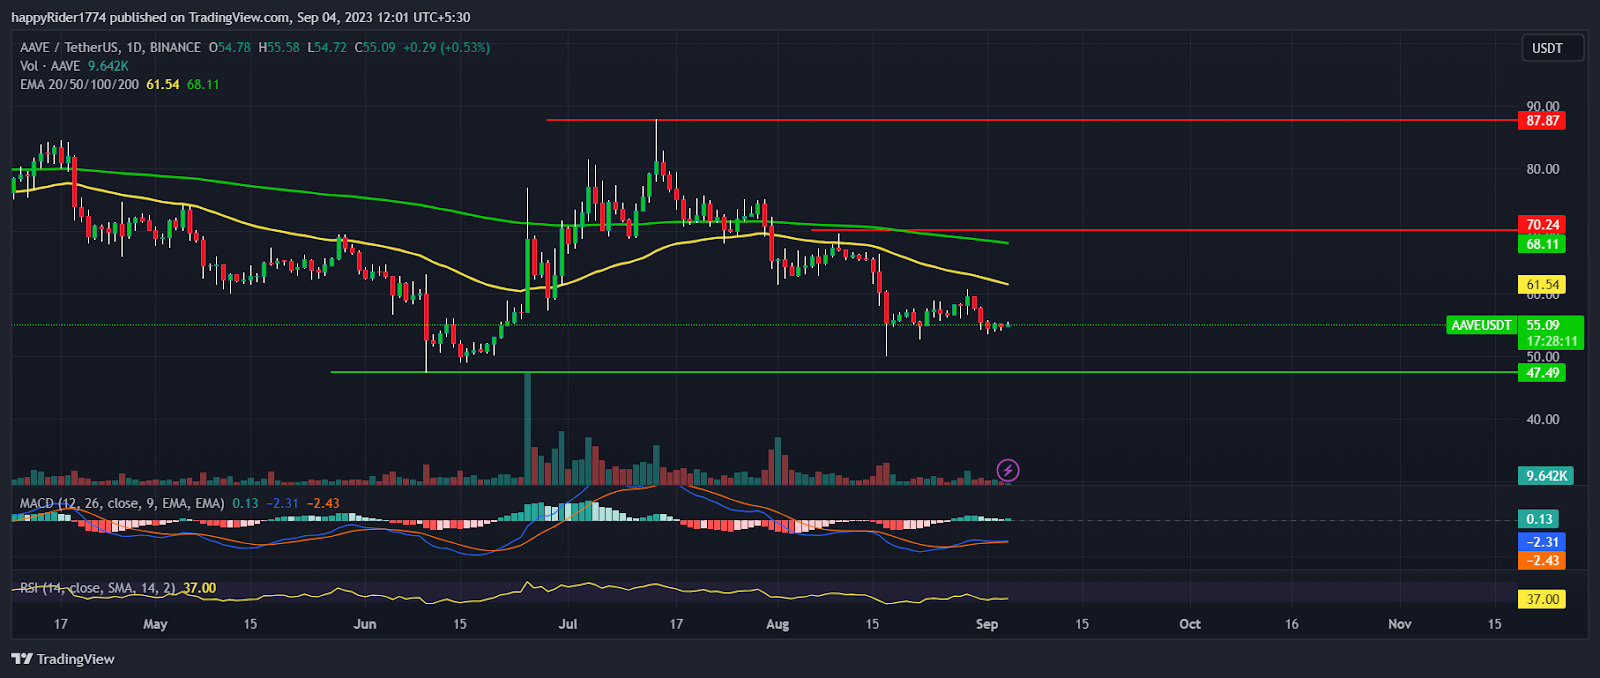 AAVE Price Prediction: Will Aave Price Defend $50 and Recover?